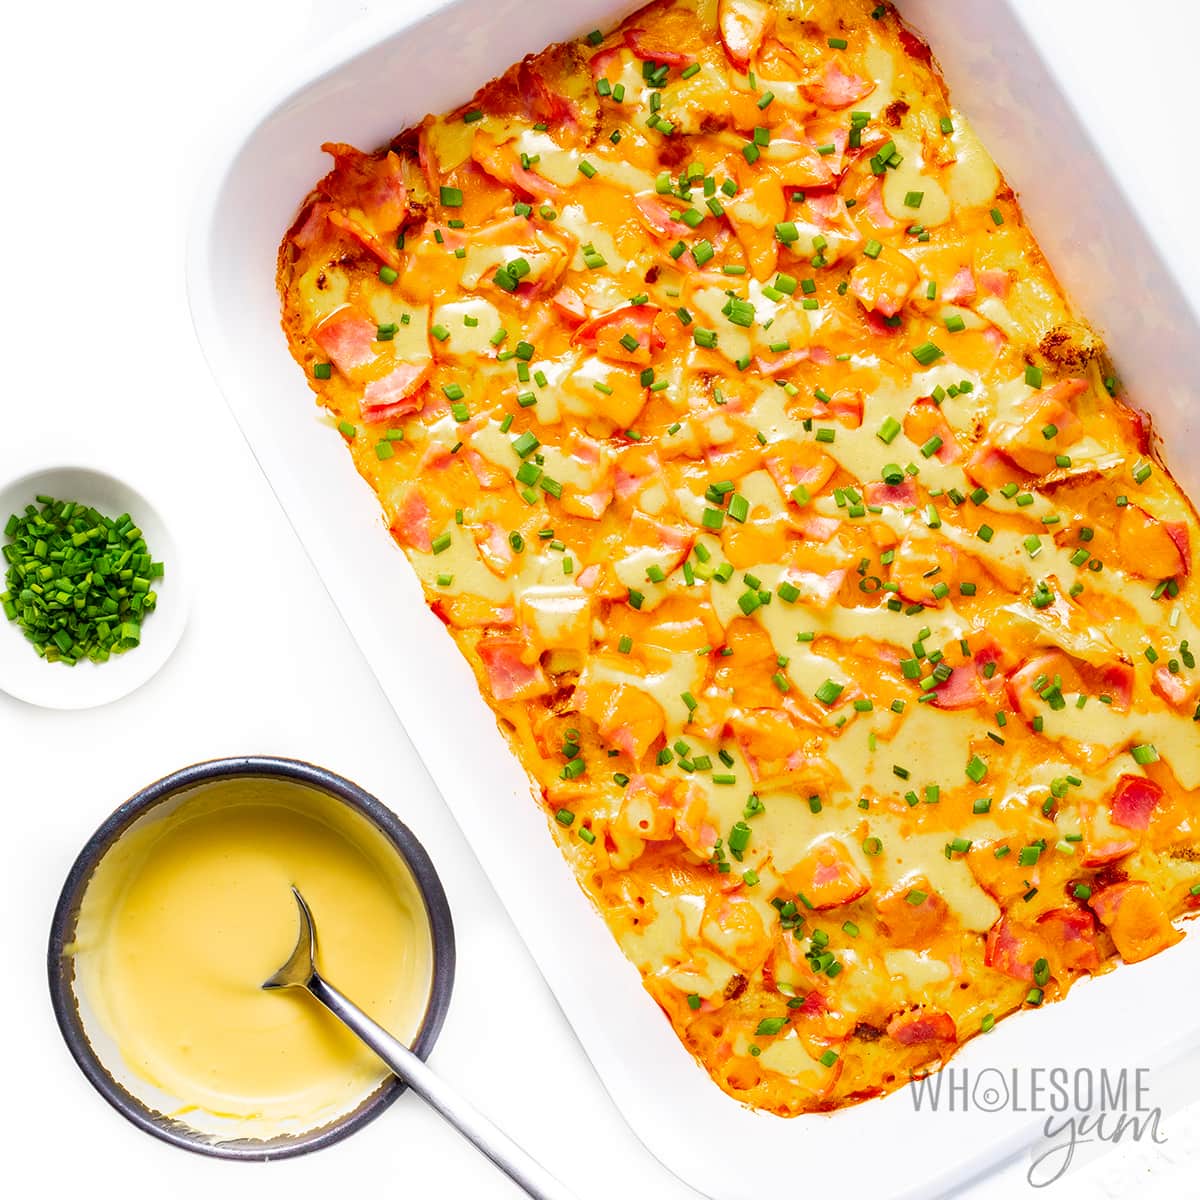 Eggs benedict casserole recipe in a baking dish with hollandaise sauce